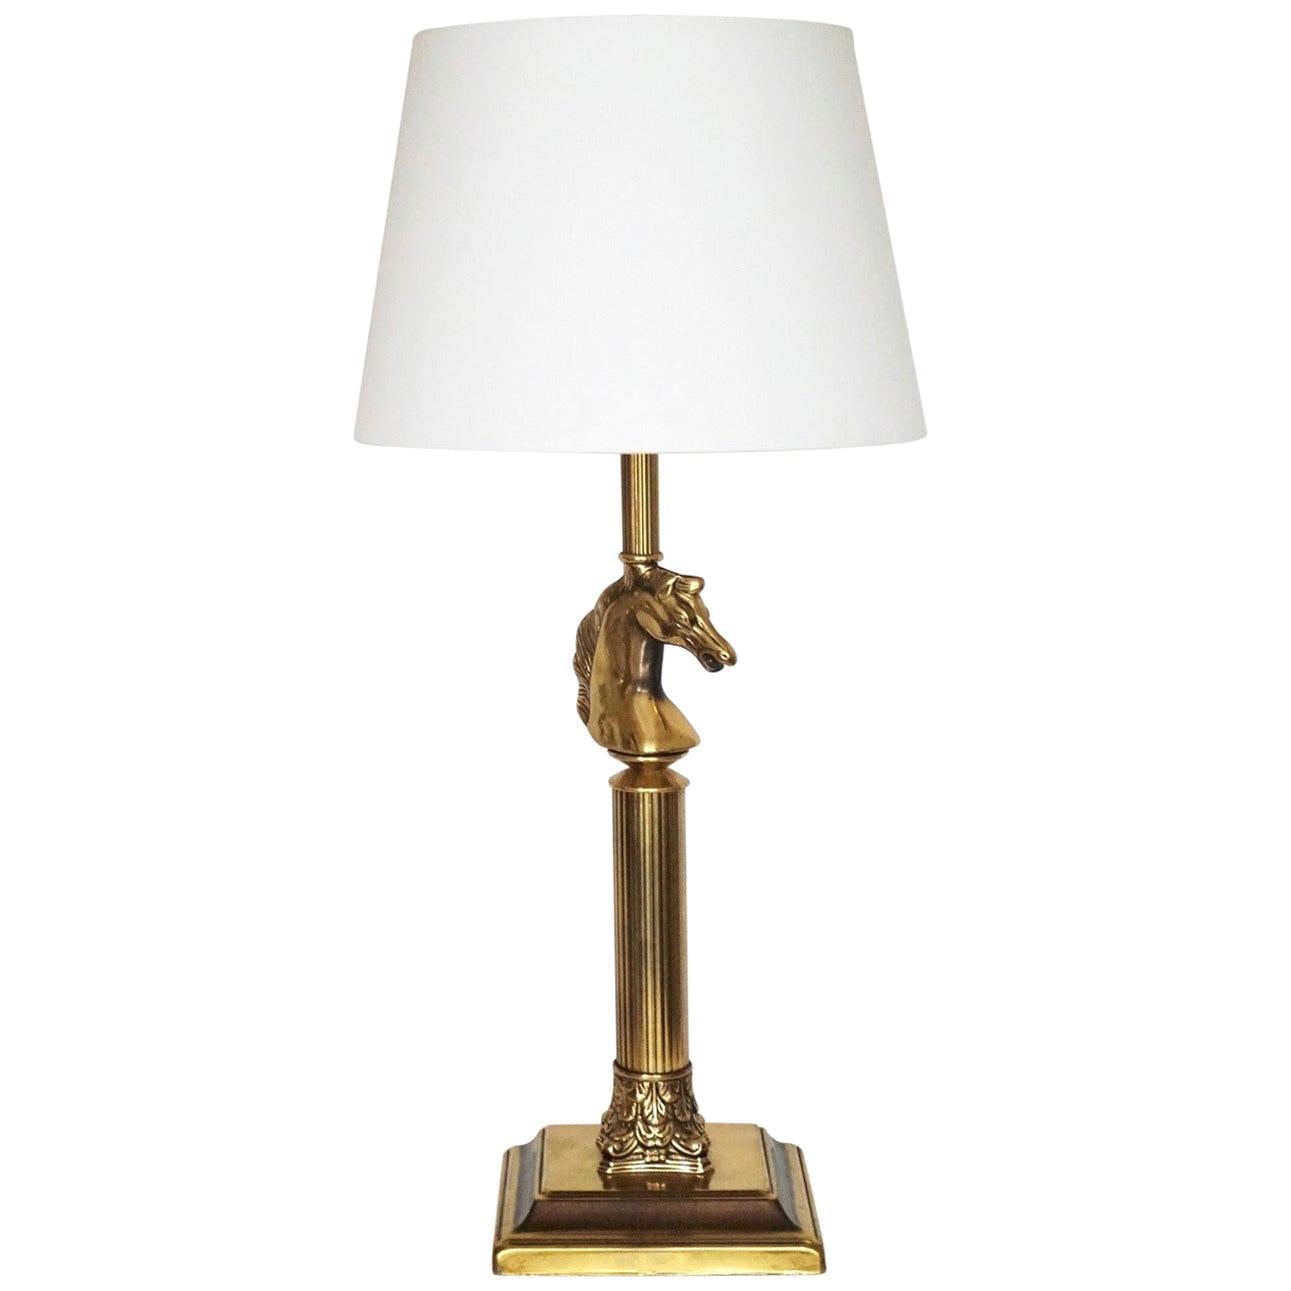 French Classical Brass Column Horse Head Table Lamp or Desk Lamp